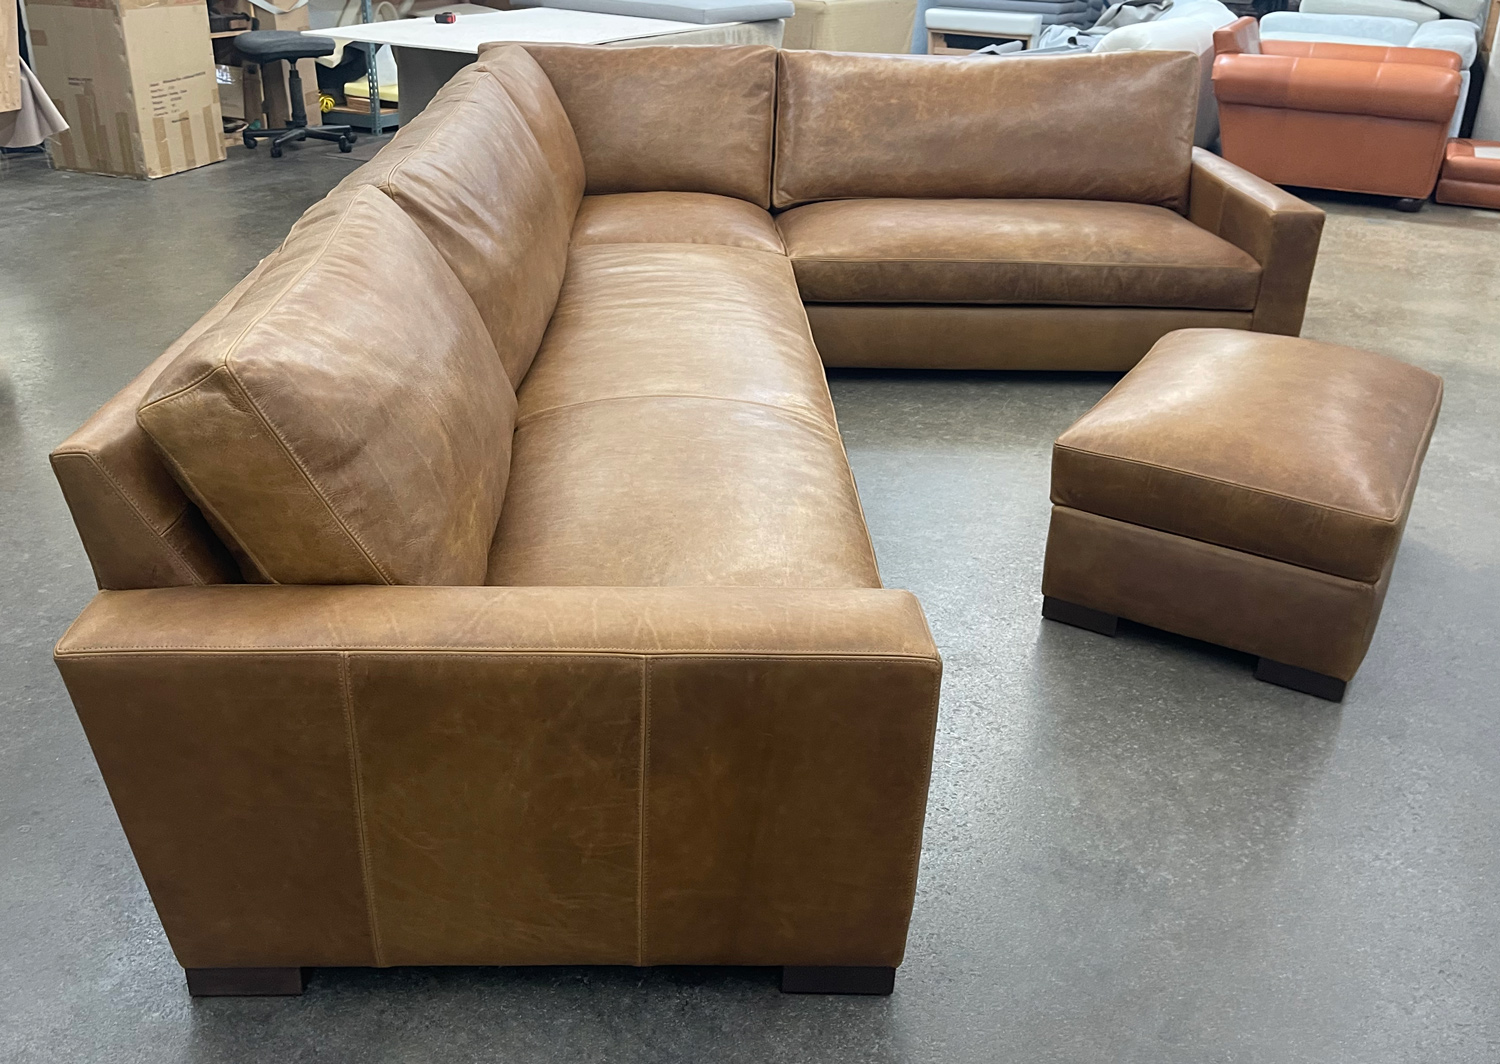 Custom Braxton L Sectional in Berkshire Tan Leather with matching Storage Ottoman - LAF side view